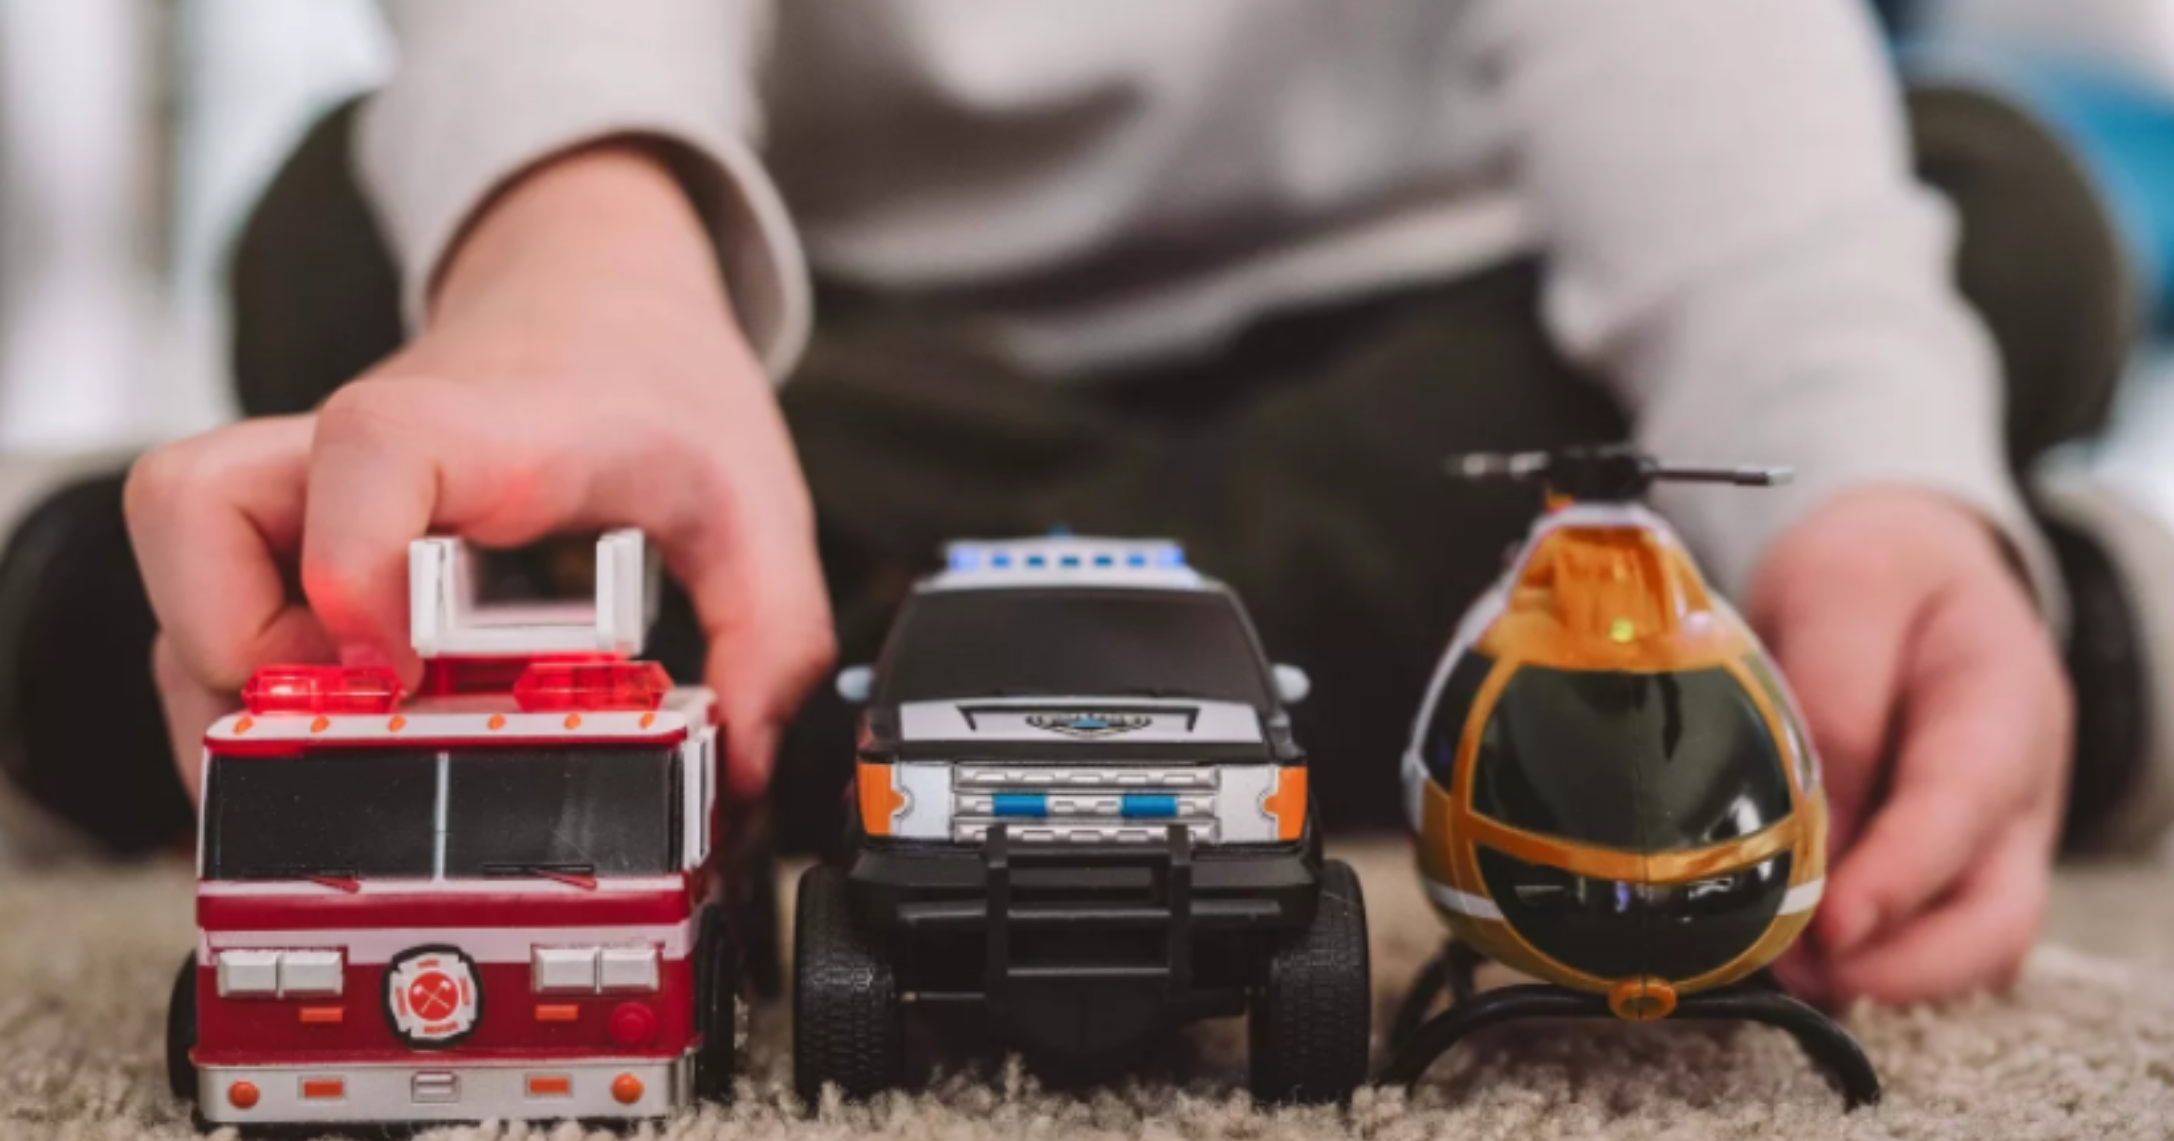 Affordable Toys for kids: 3 toys for $30 or less